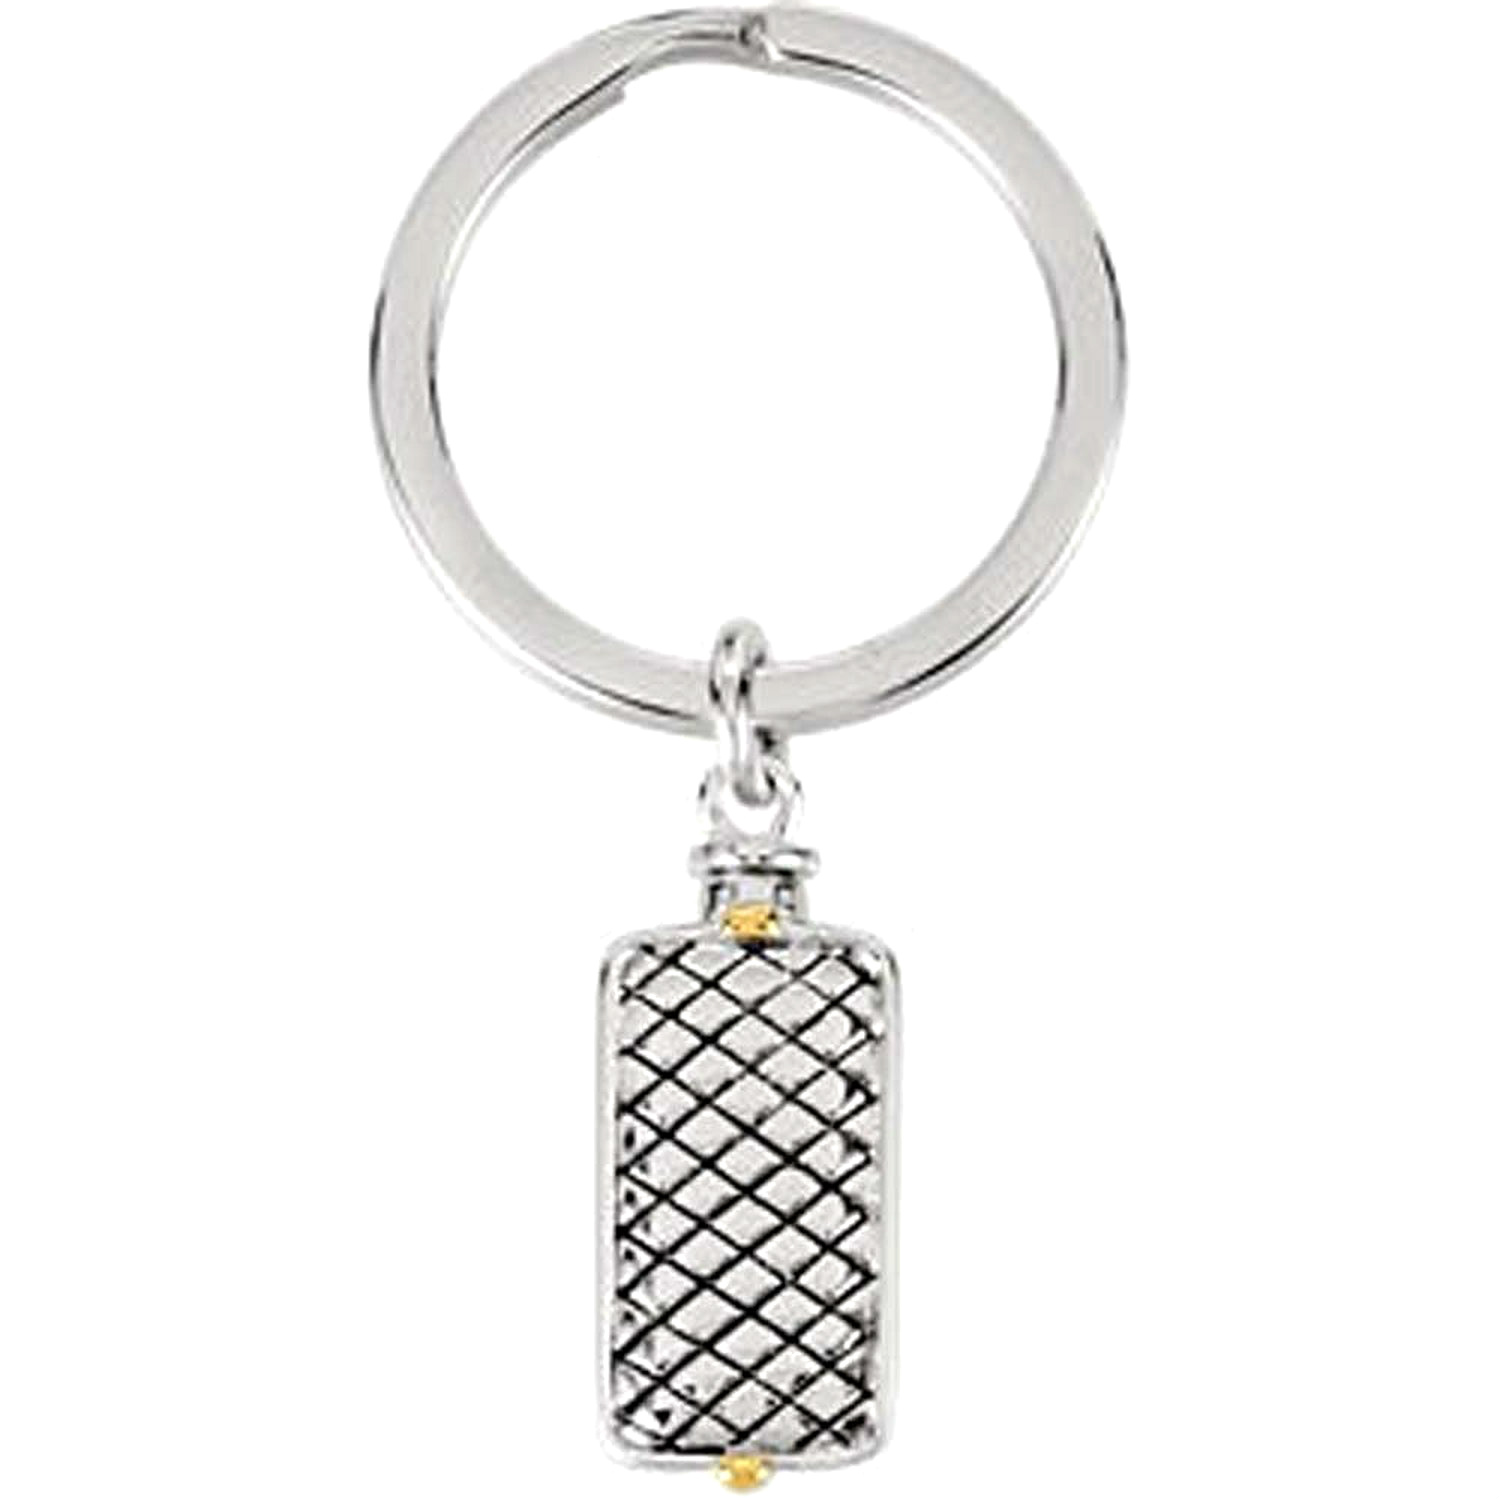 Ash Holder Two-Tone Rectangle Key Chain in Rhodium Plate Sterling Silver and 14k Yellow Gold Plate Sterling Silver.